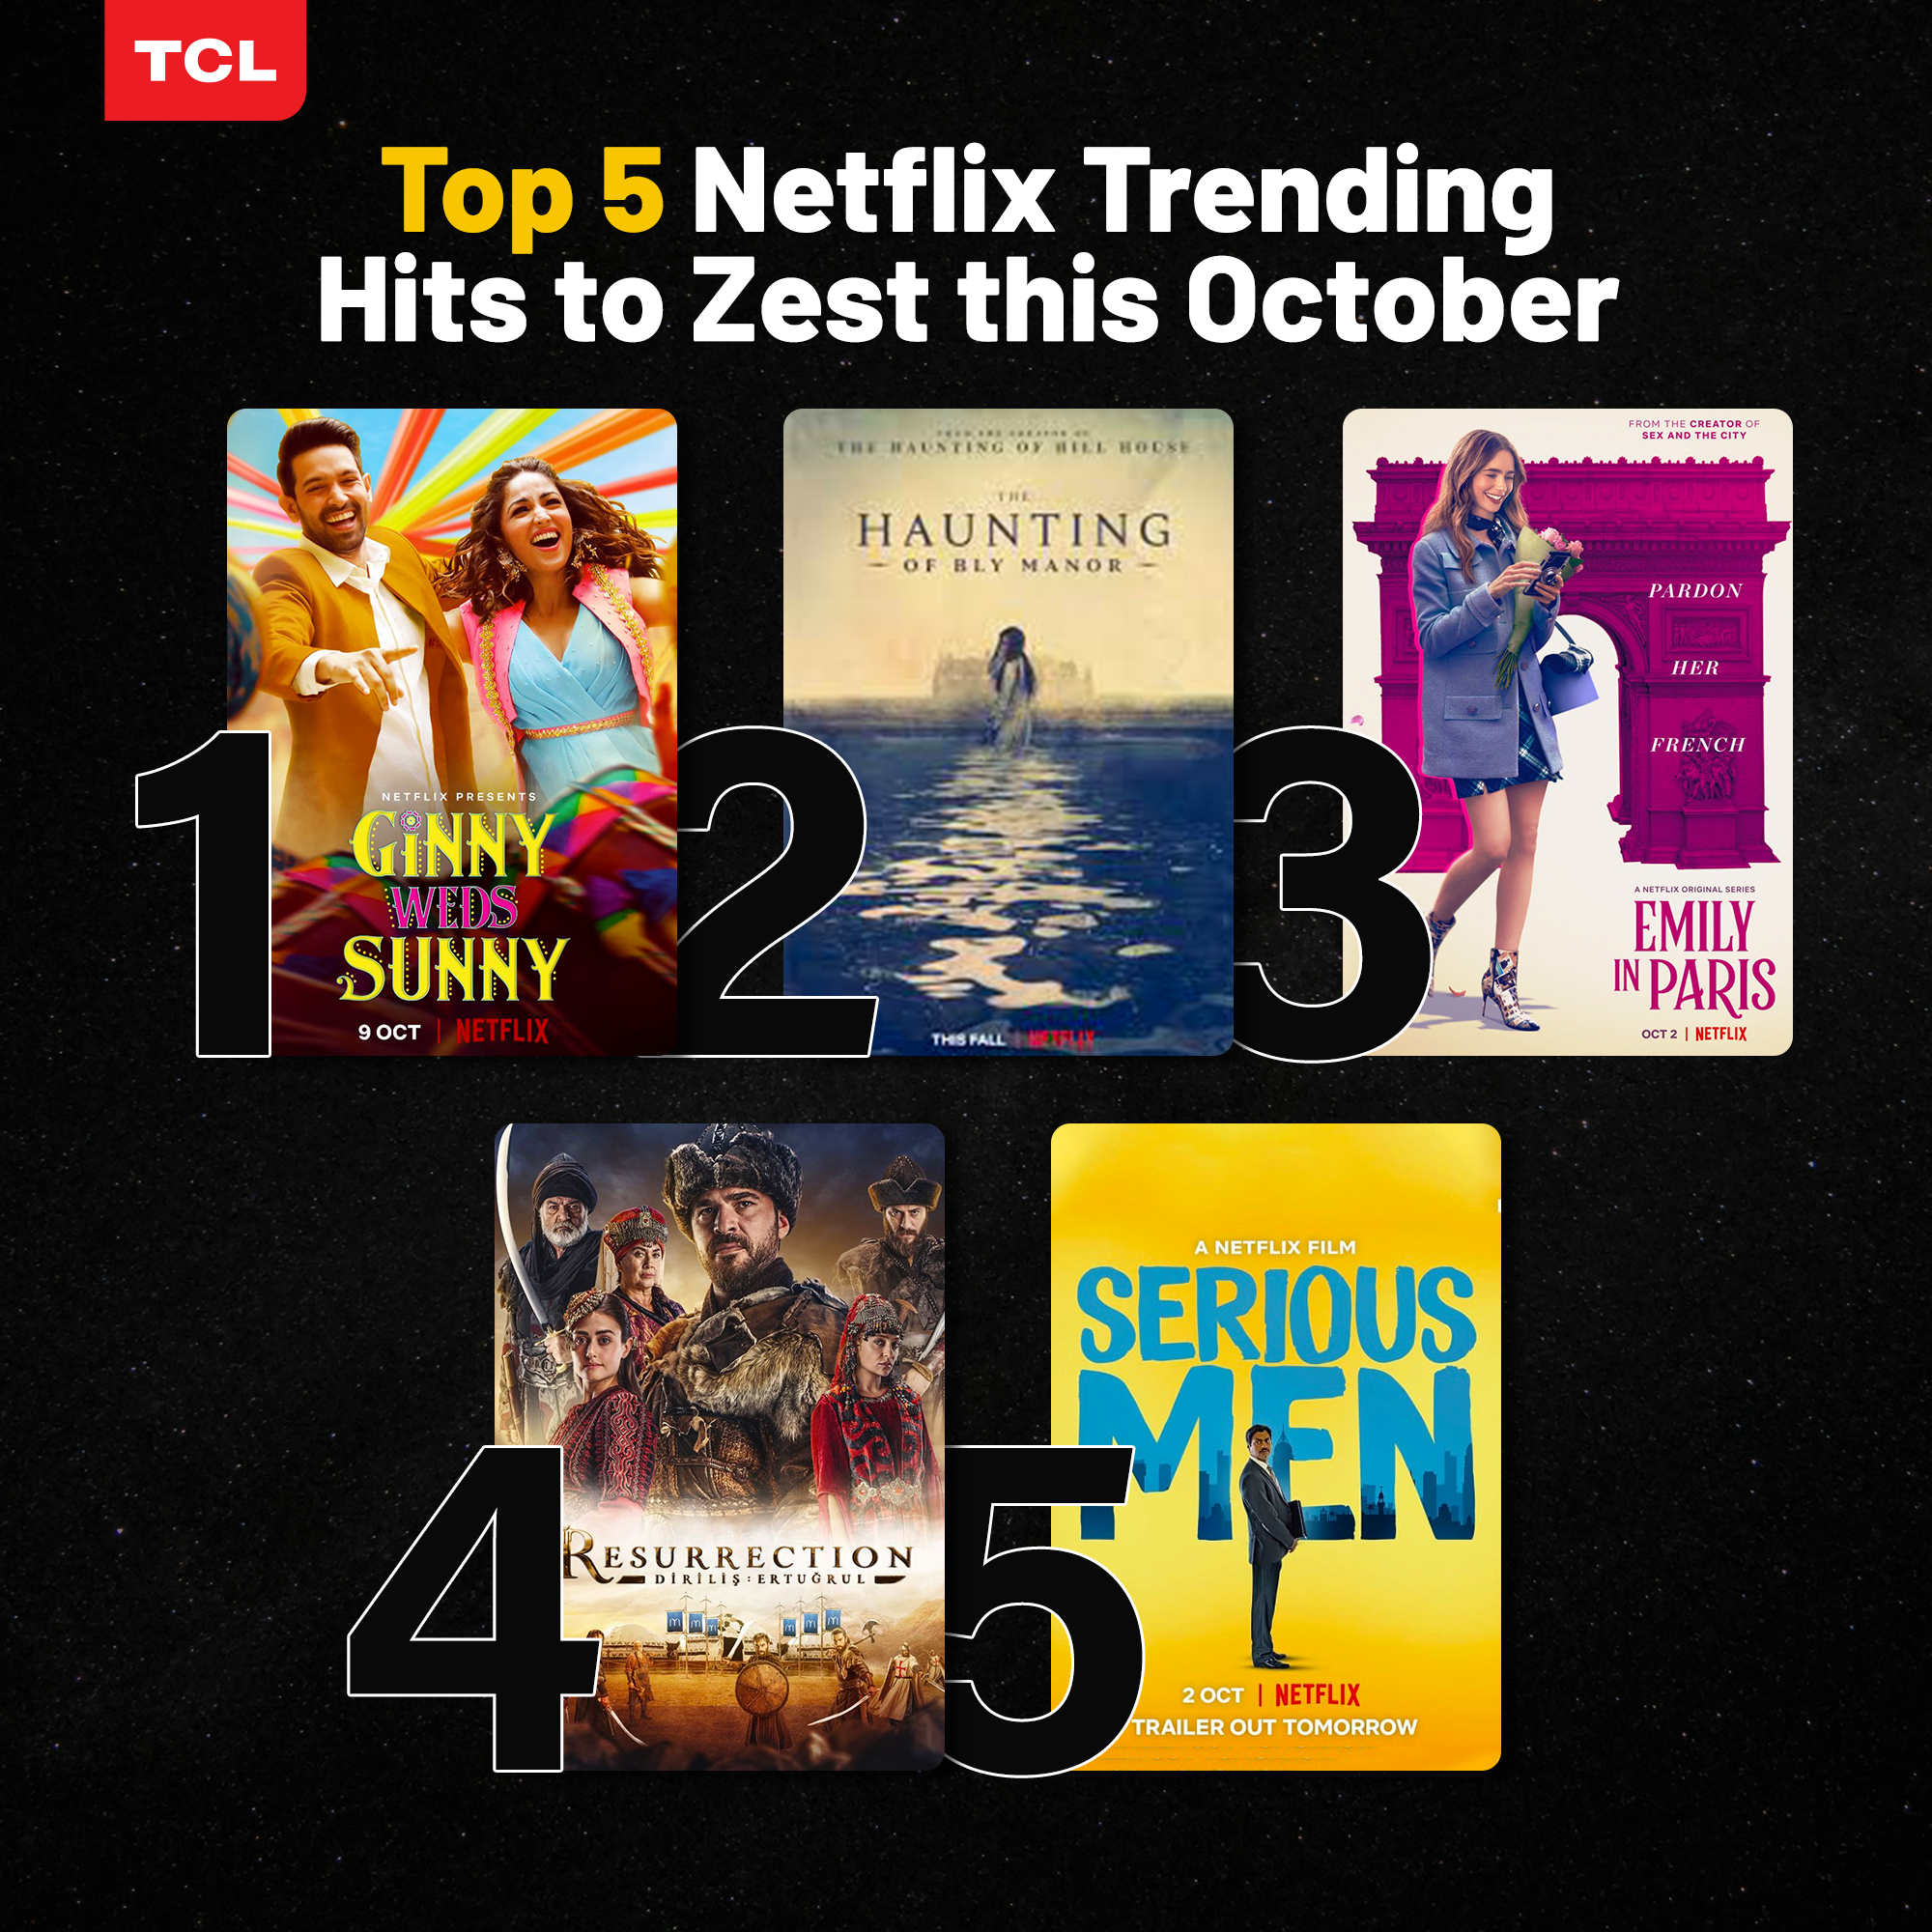 Netflix Top 5 with TCL this October